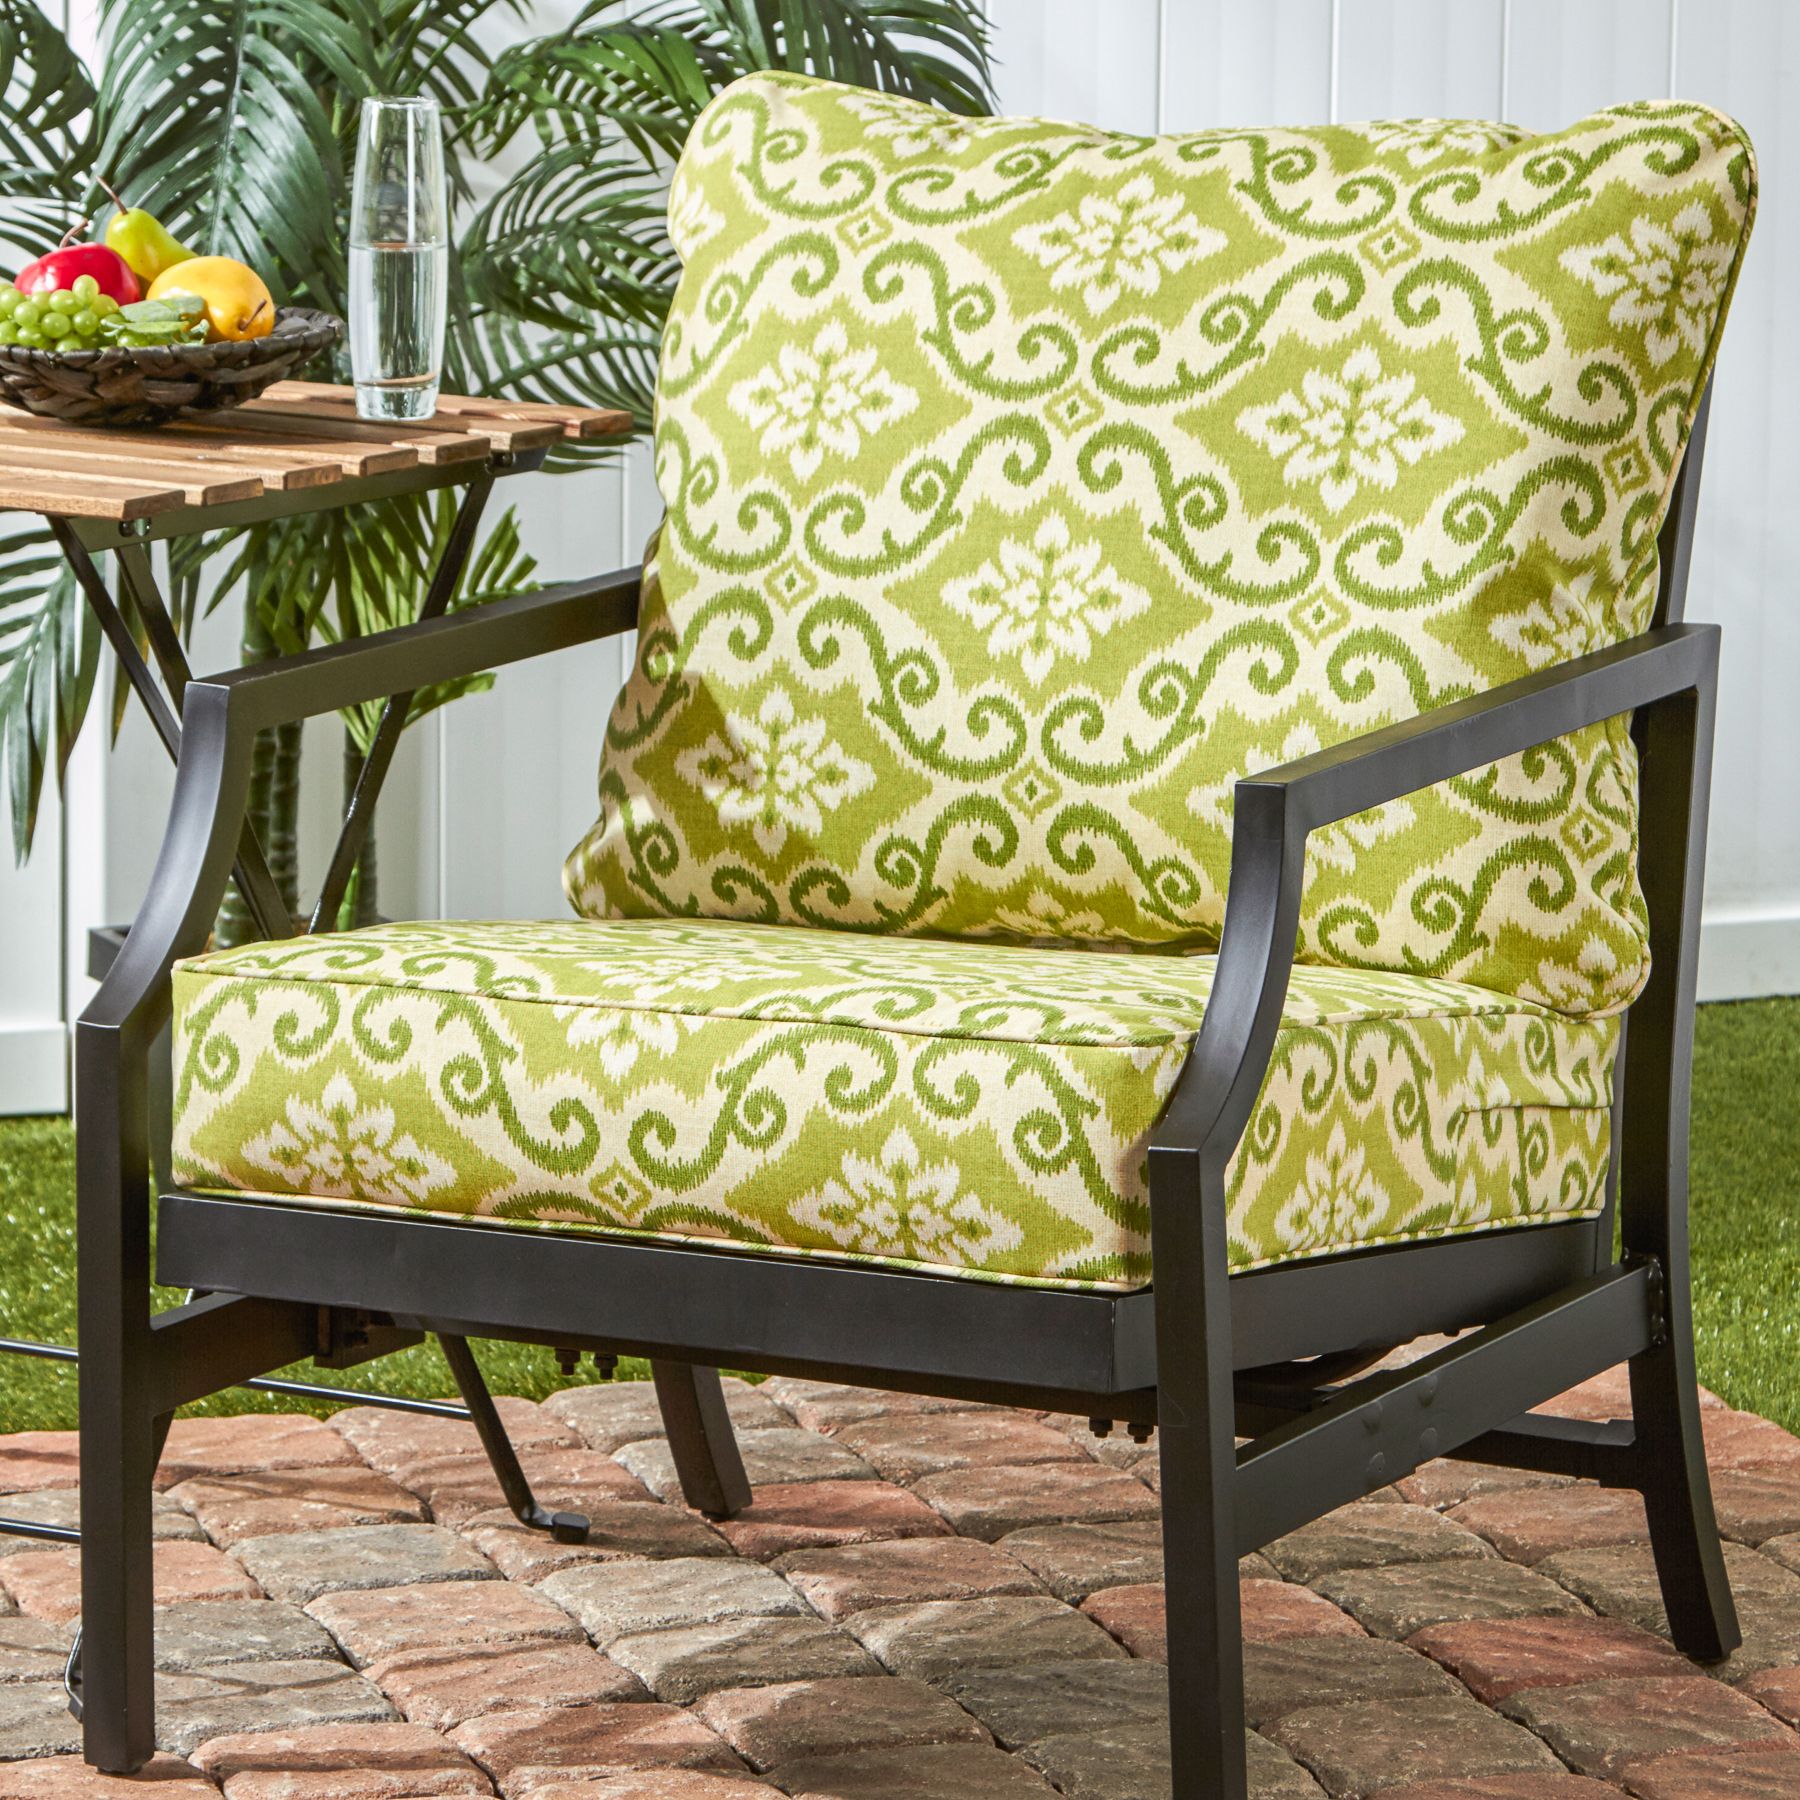 Outdoor Sunbrella Deep Seat Chair Cushion Set Green Ikat Patio Garden Intended For Green Outdoor Seating Patio Sets (View 2 of 15)